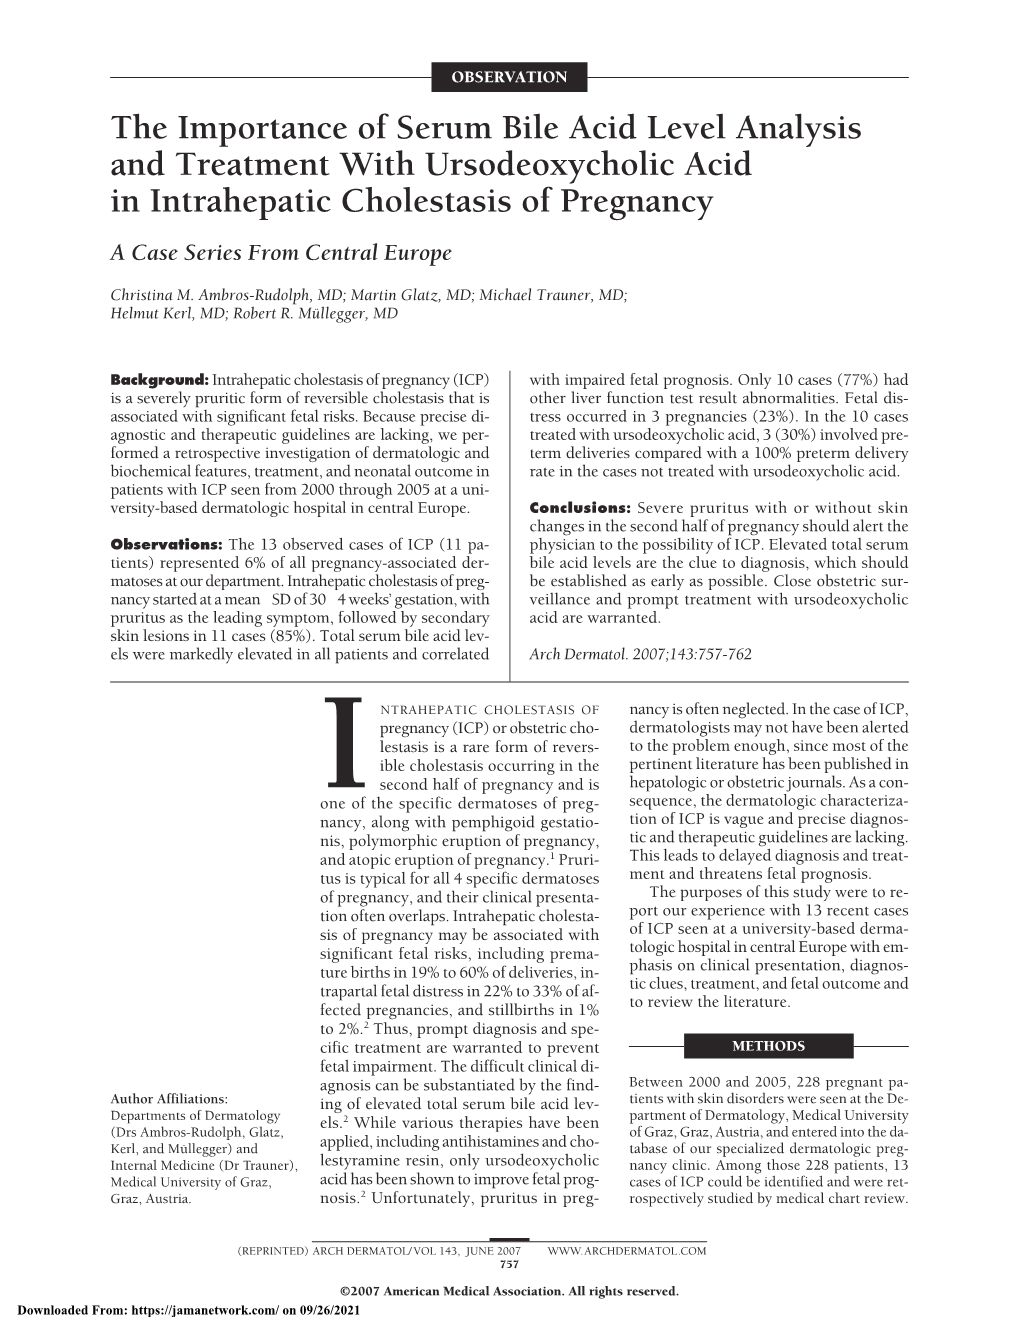 The Importance of Serum Bile Acid Level Analysis and Treatment with Ursodeoxycholic Acid in Intrahepatic Cholestasis of Pregnancy a Case Series from Central Europe